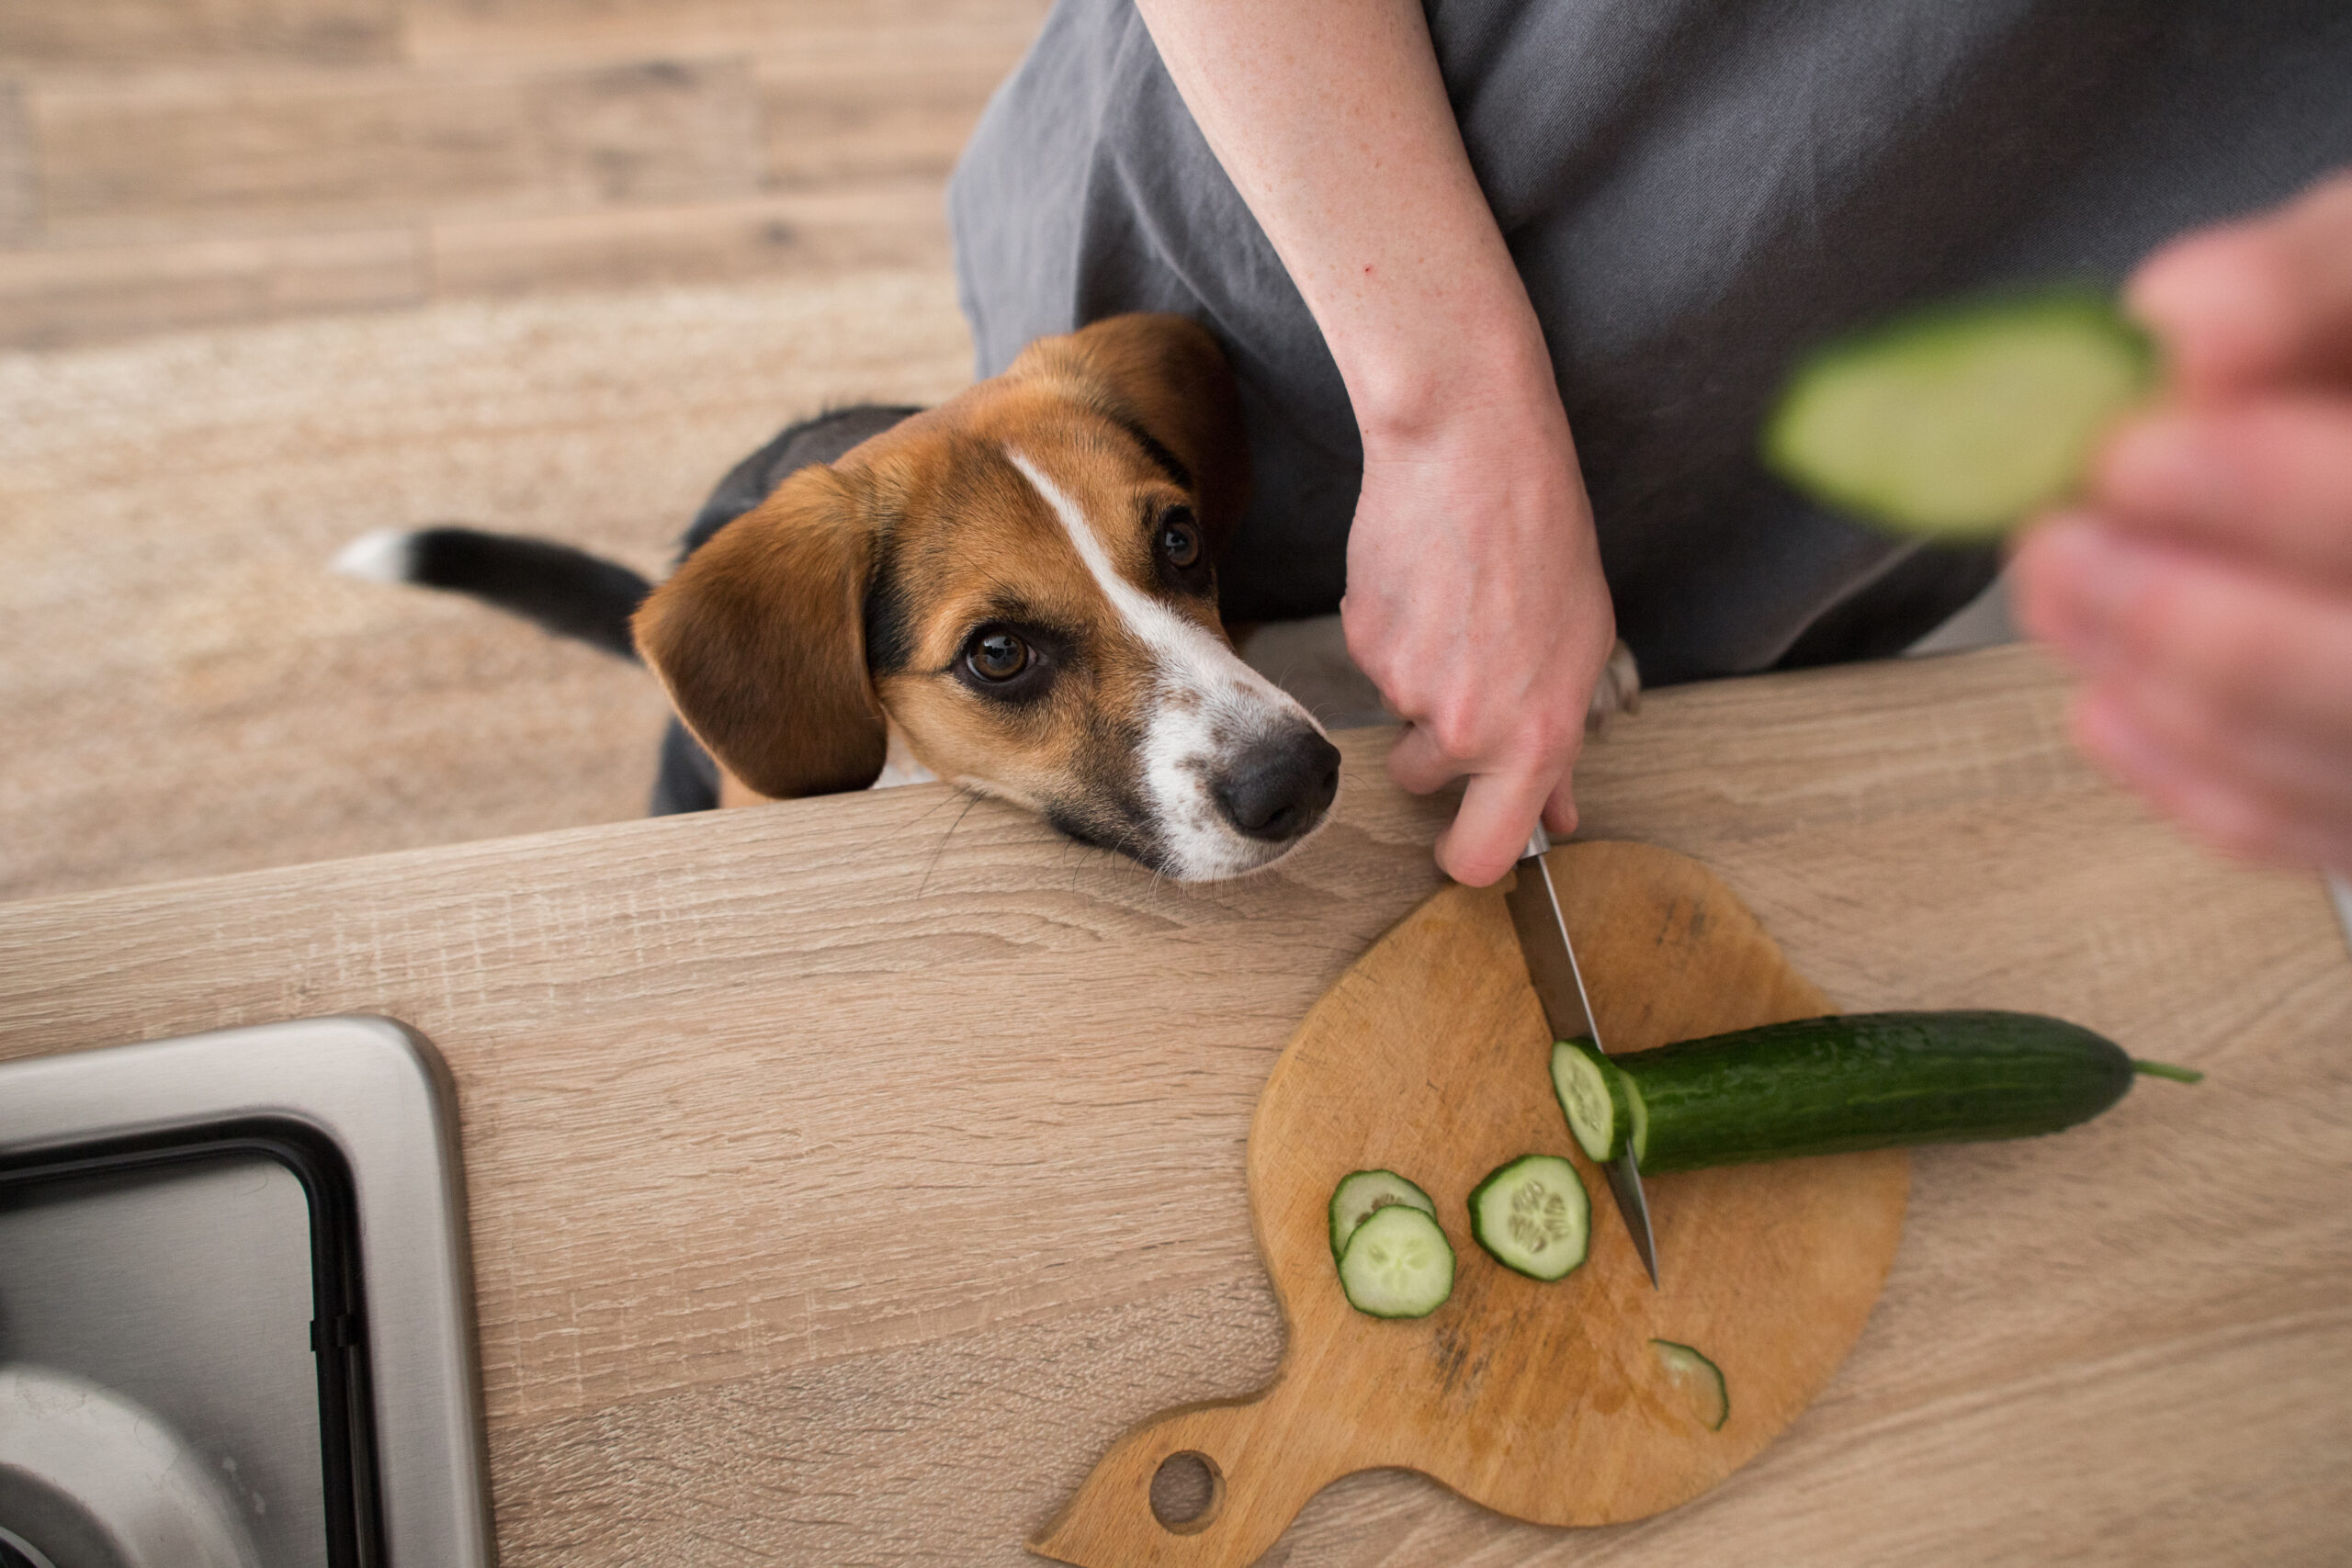 Beagle,Dog,Asks,For,Cucumber,In,The,Kitchen